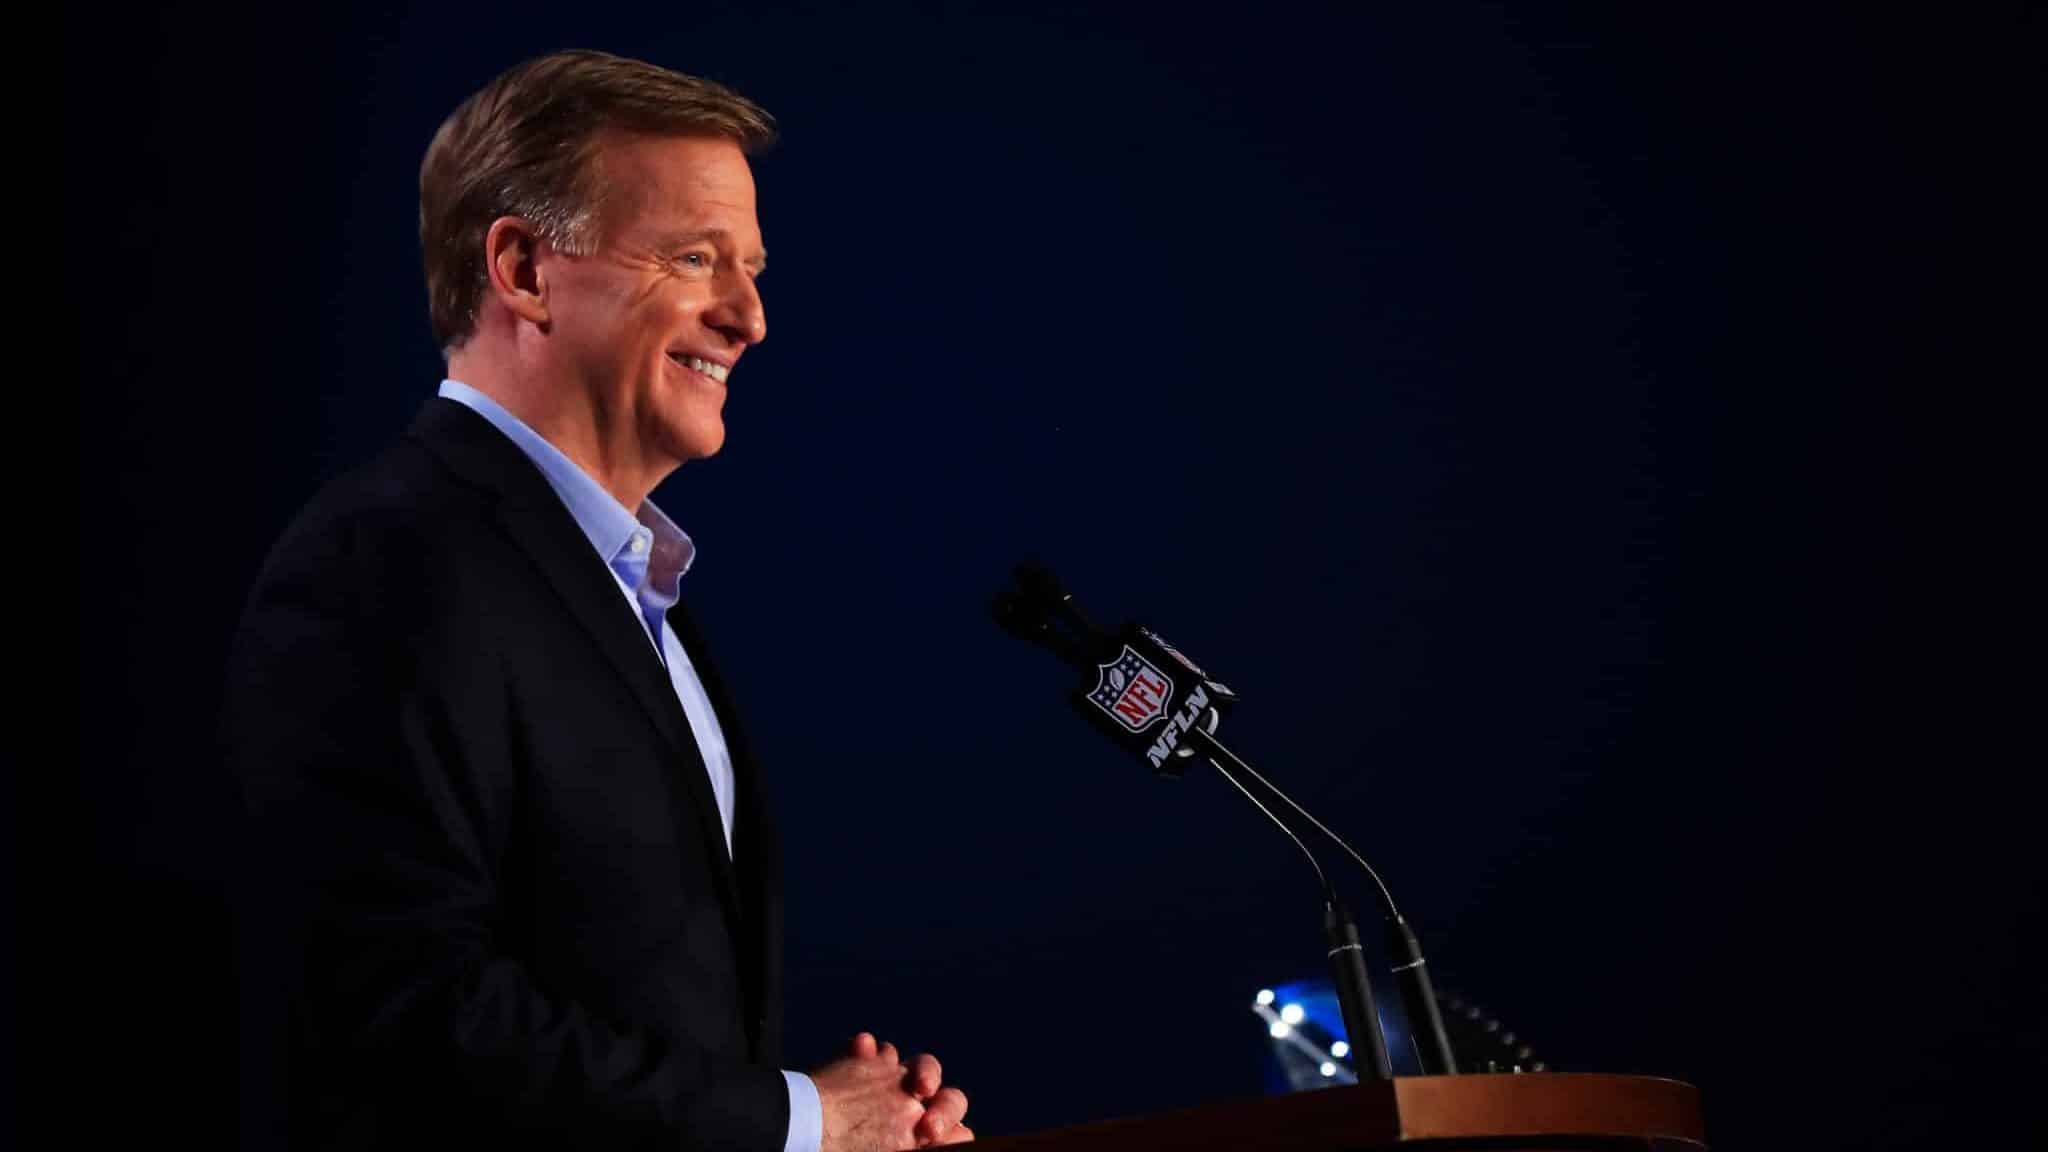 MIAMI, FLORIDA - JANUARY 29: NFL Commissioner Roger Goodell speaks to the media during a press conference prior to Super Bowl LIV at the Hilton Miami Downtown on January 29, 2020 in Miami, Florida. The San Francisco 49ers will face the Kansas City Chiefs in the 54th playing of the Super Bowl, Sunday February 2nd.